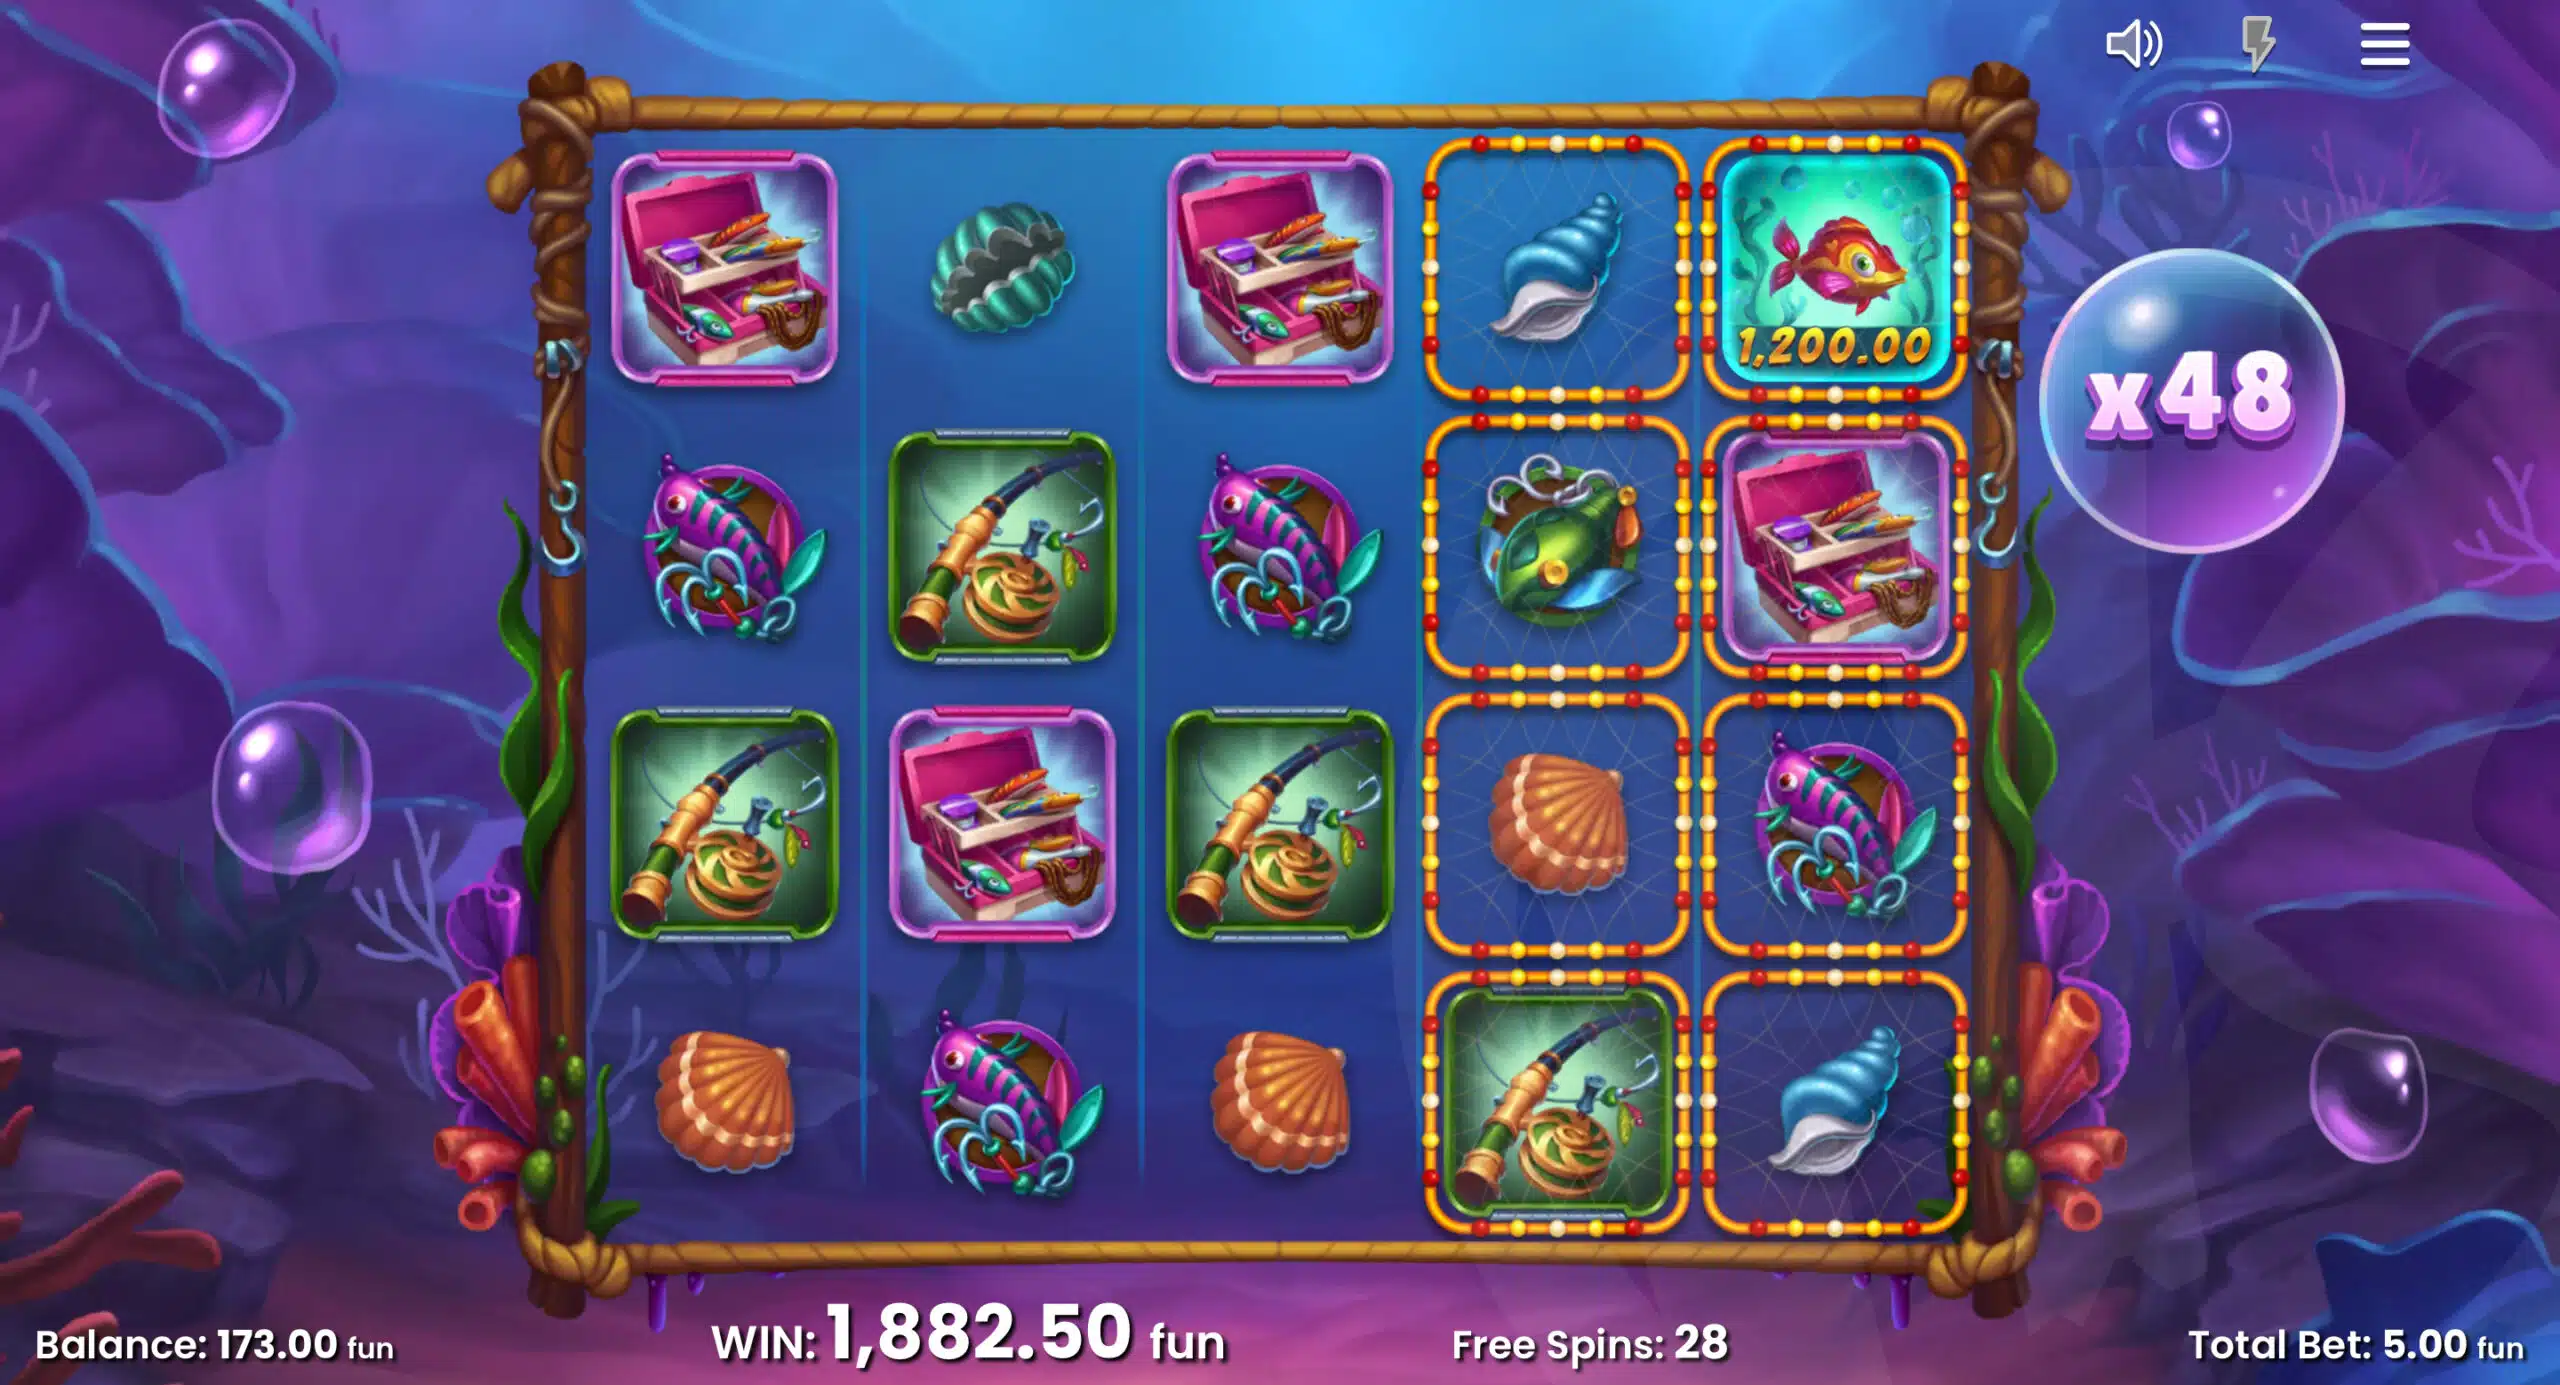 Free Spins Continue For As Long as Net Symbols Remain on the Reels, With the Total Multiplier Increasing by +1 For Each Nudge